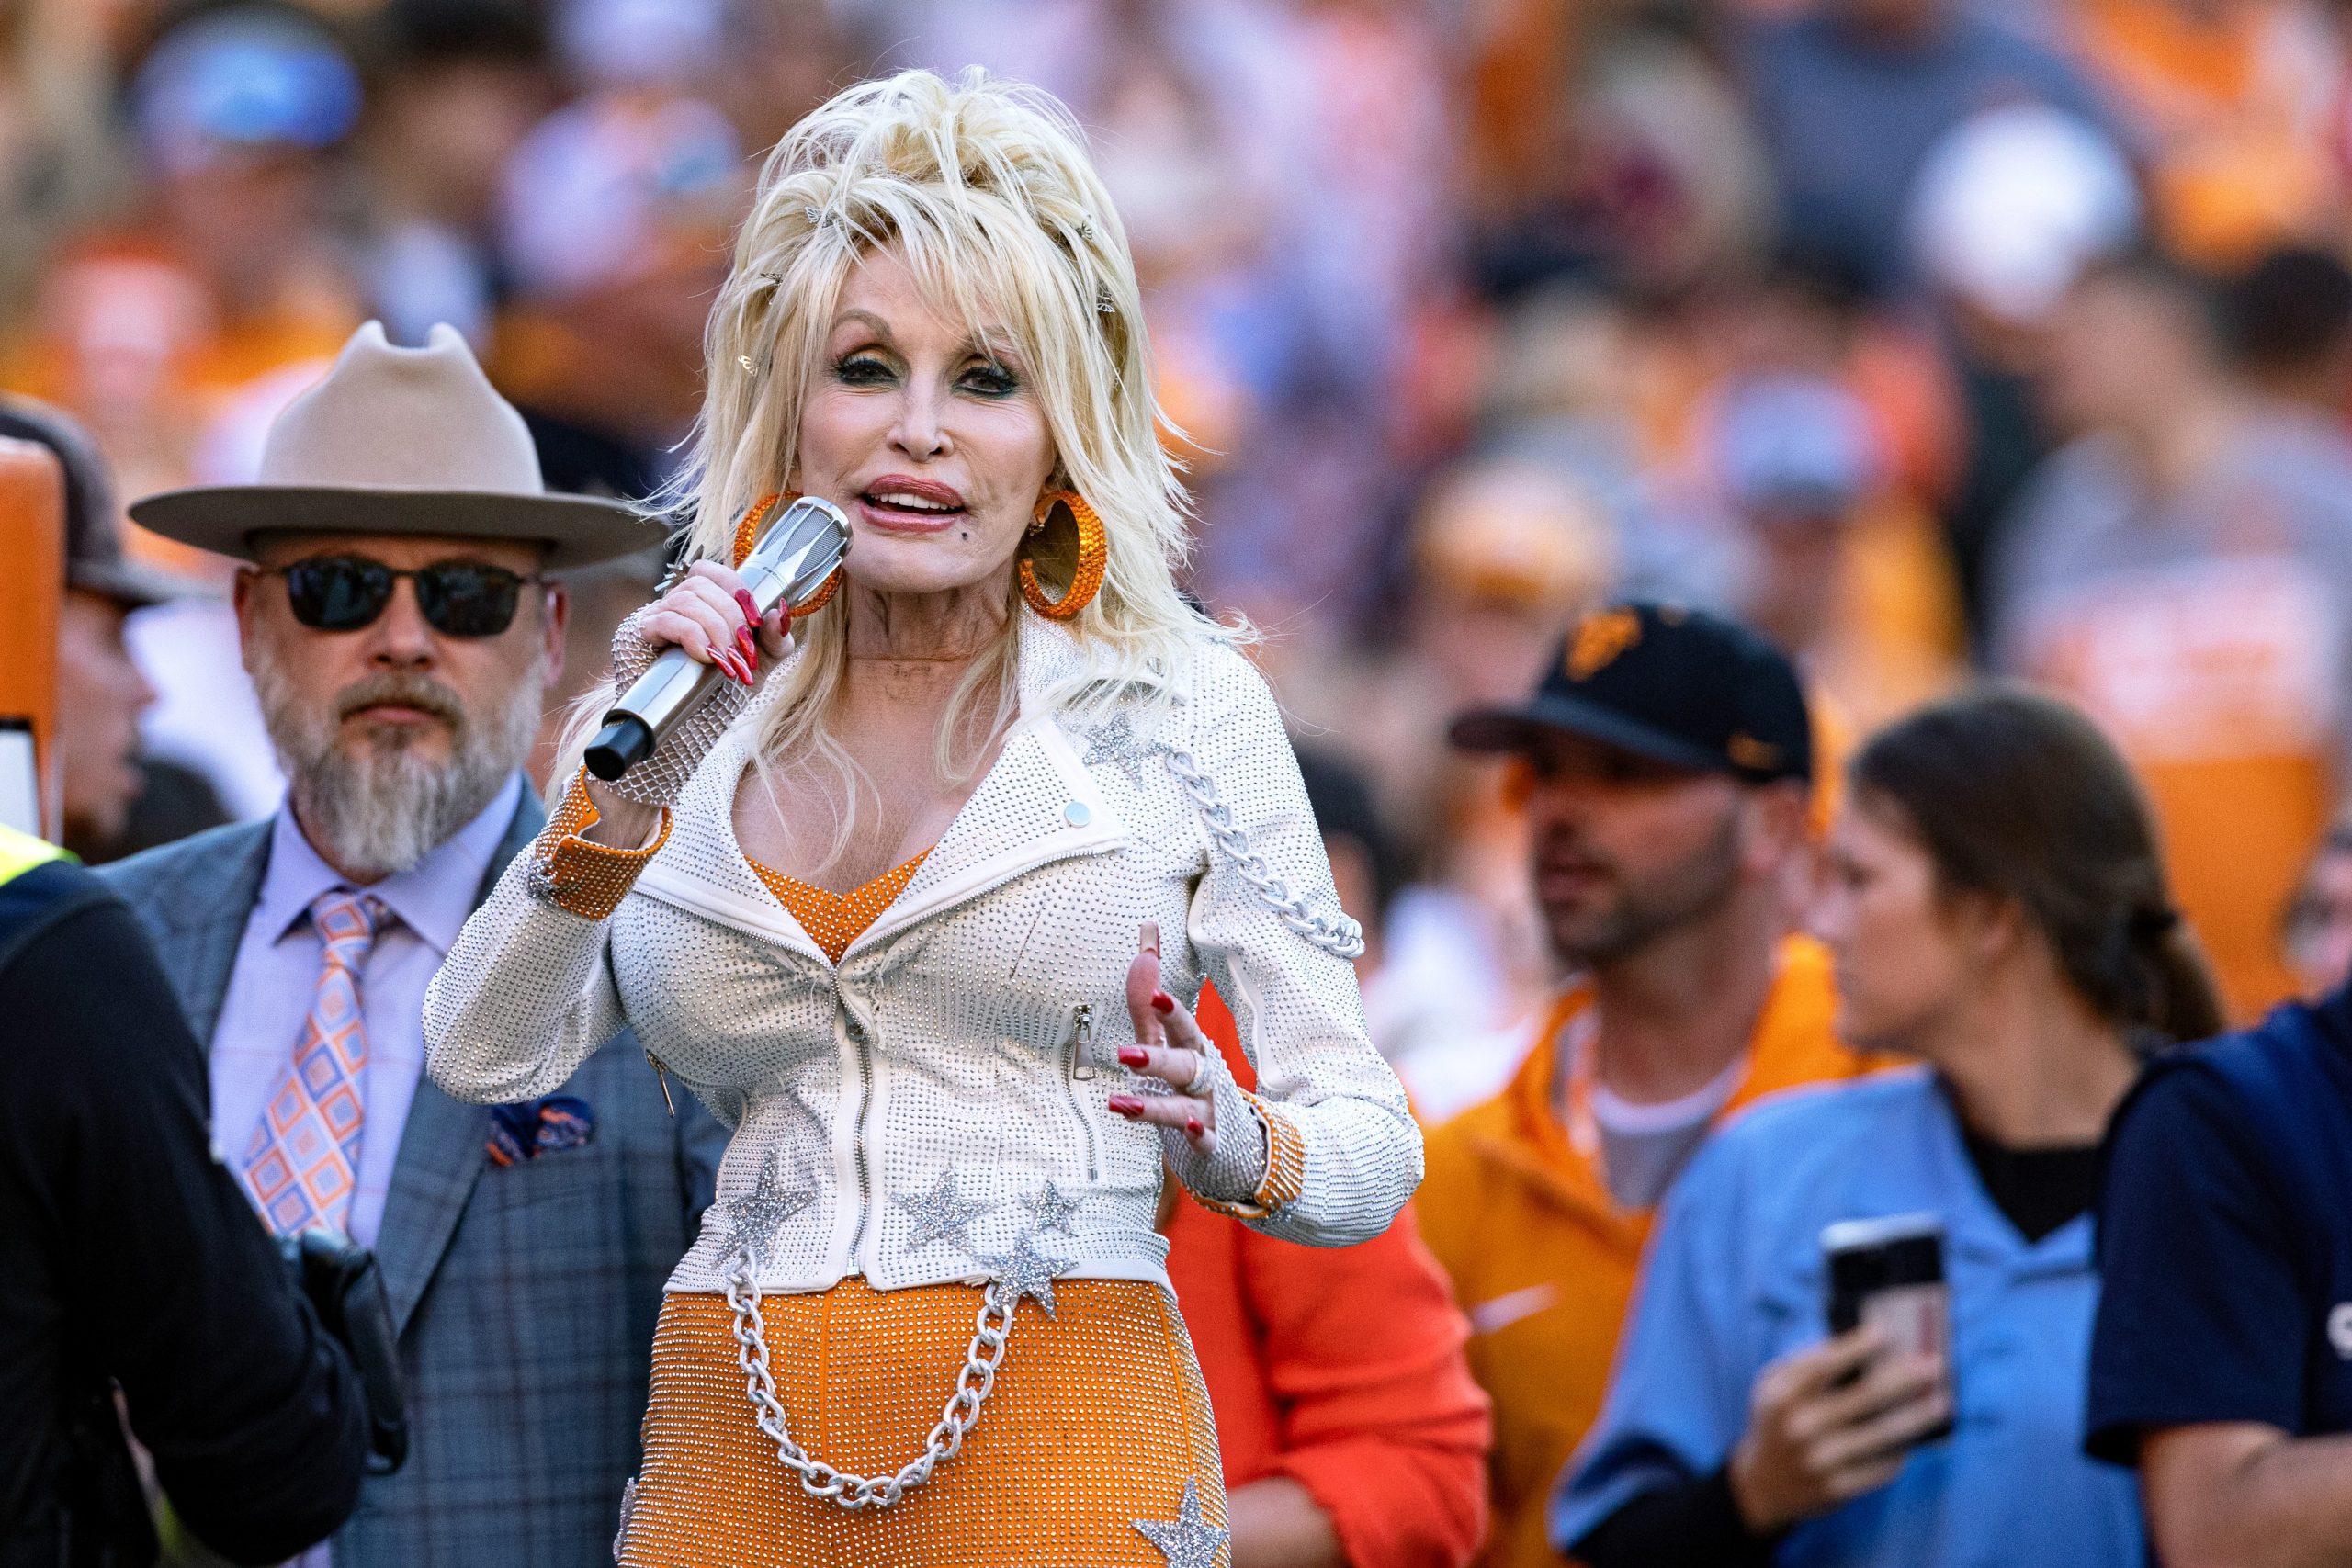 Dolly Parton, 77 years old, has revealed the cosmetic procedures she regrets